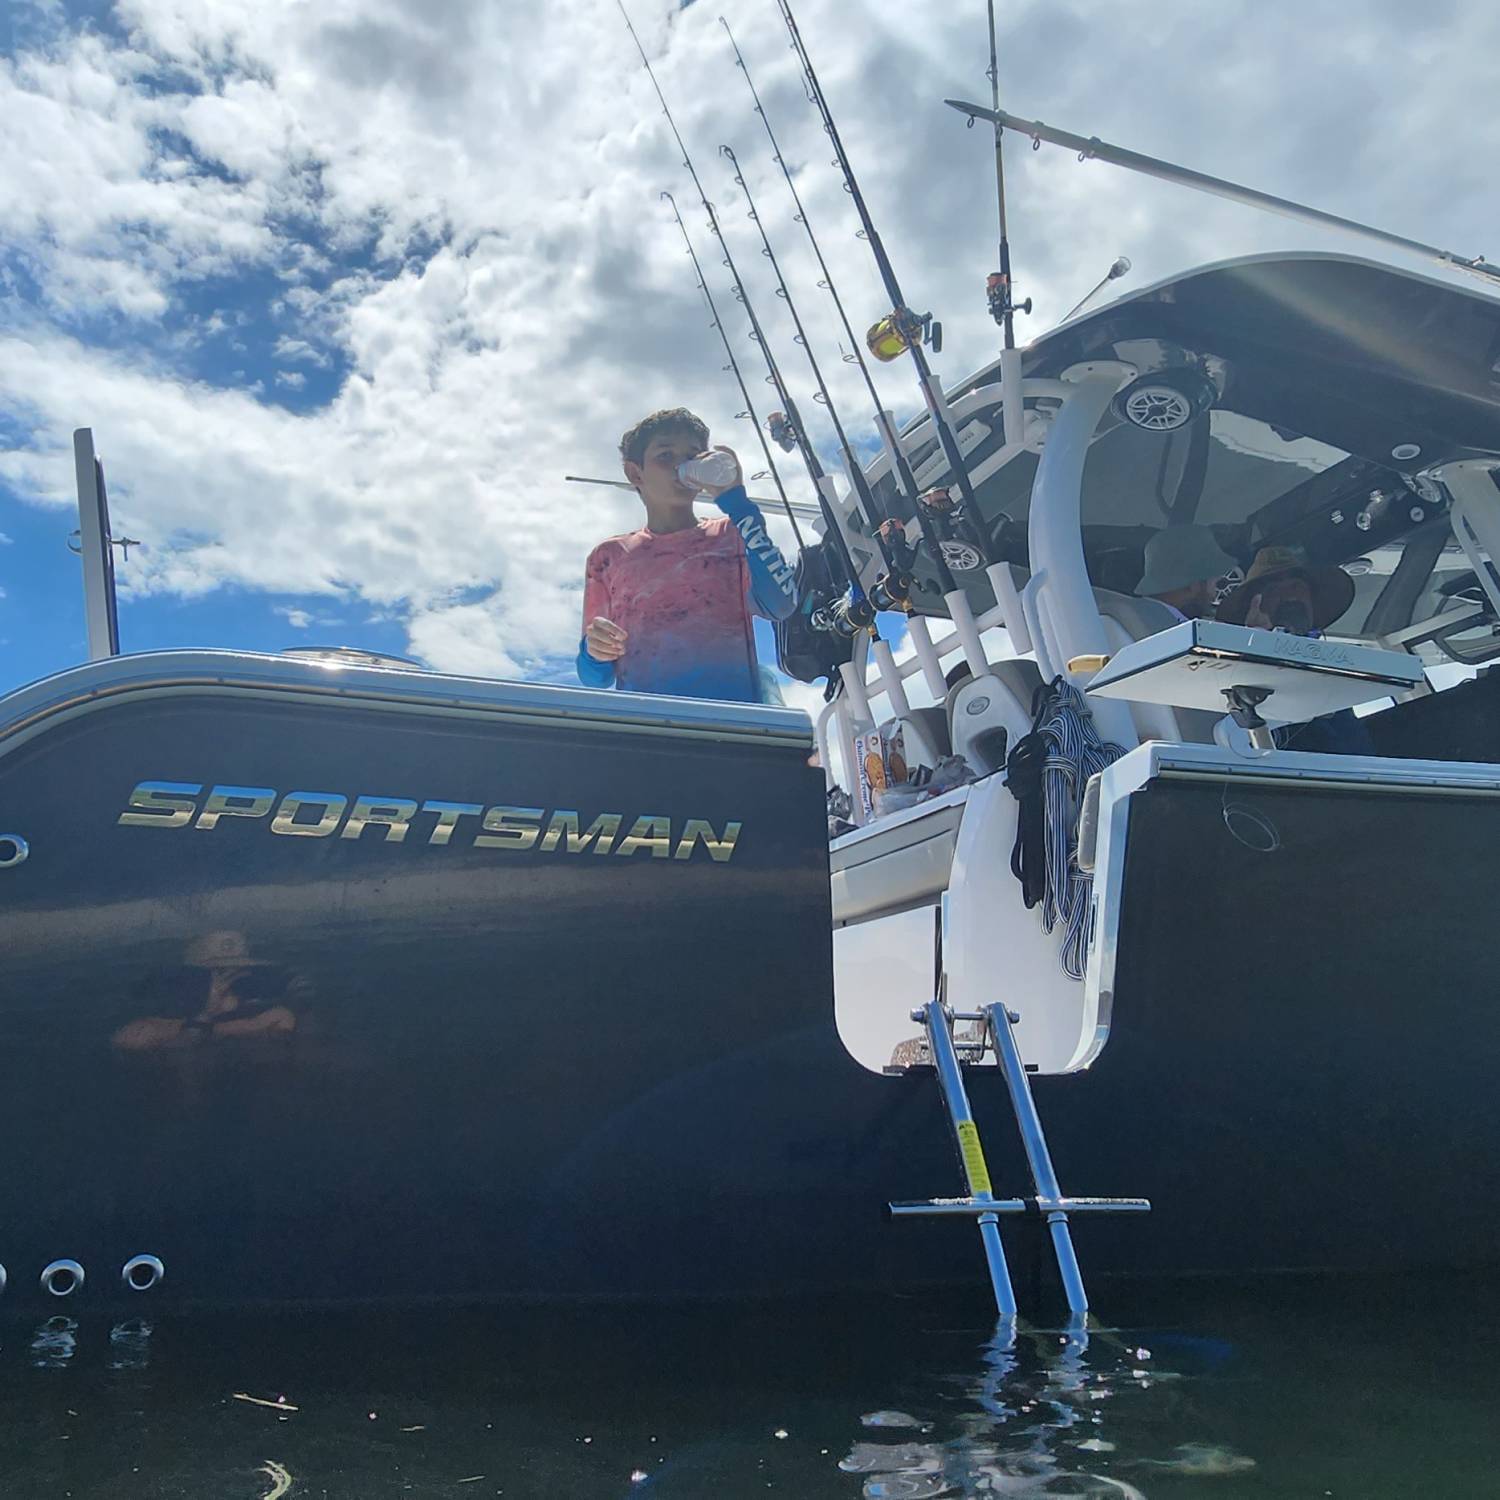 Title: At the isle - On board their Sportsman Open 352 Center Console - Location: Biscayne Isle. Participating in the Photo Contest #SportsmanJune2023